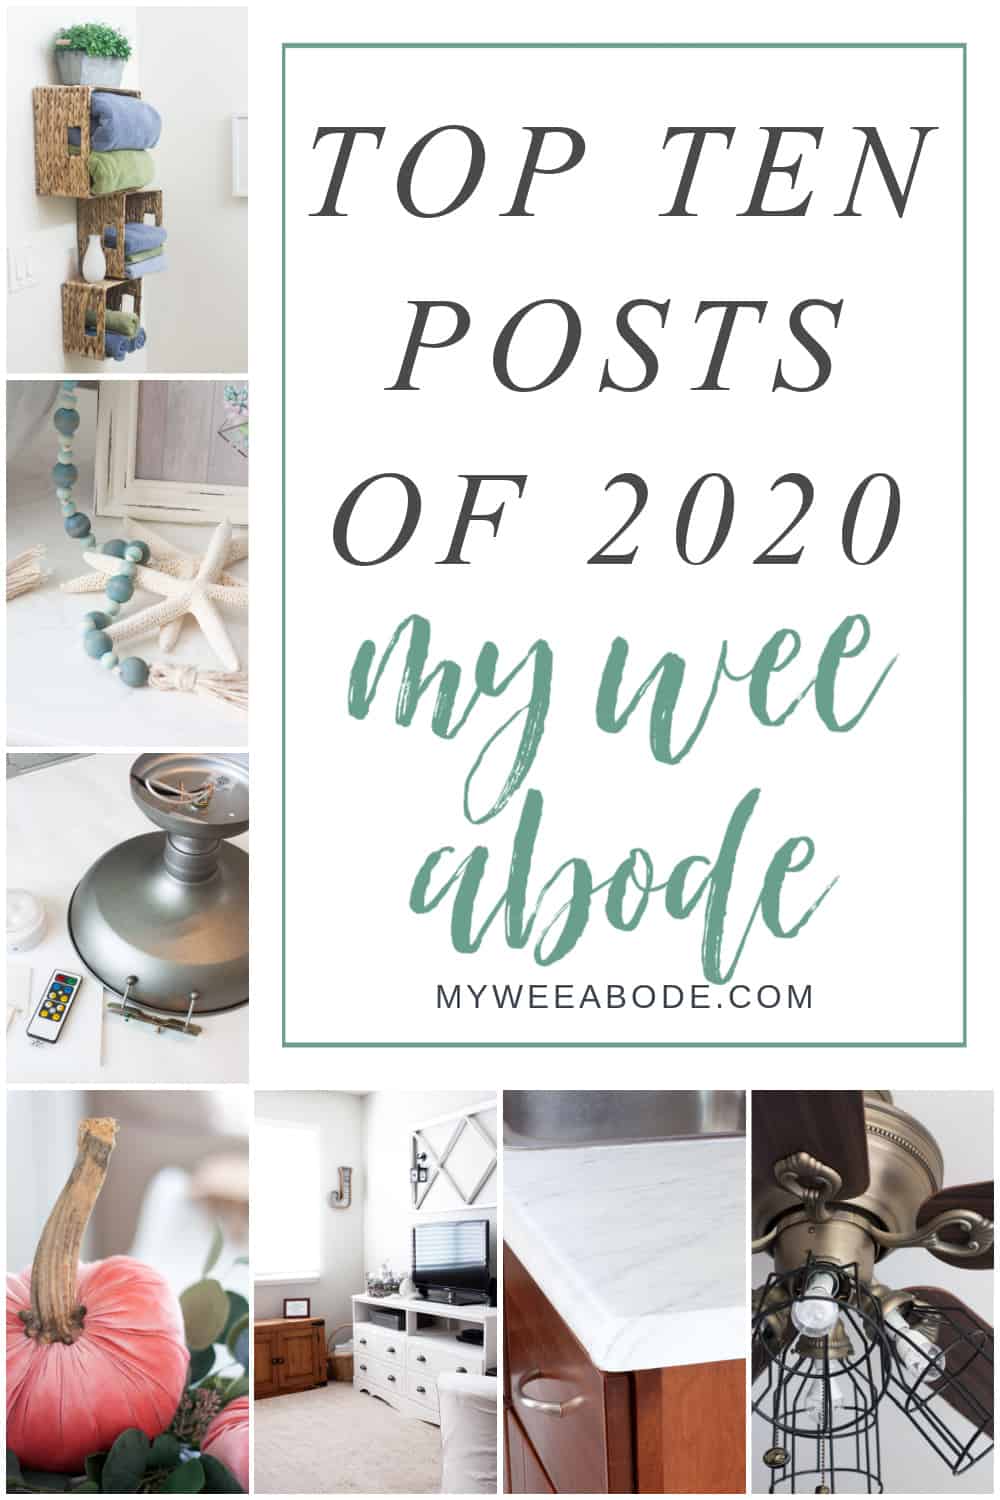 top ten posts of 2020 collage of projects and crafts